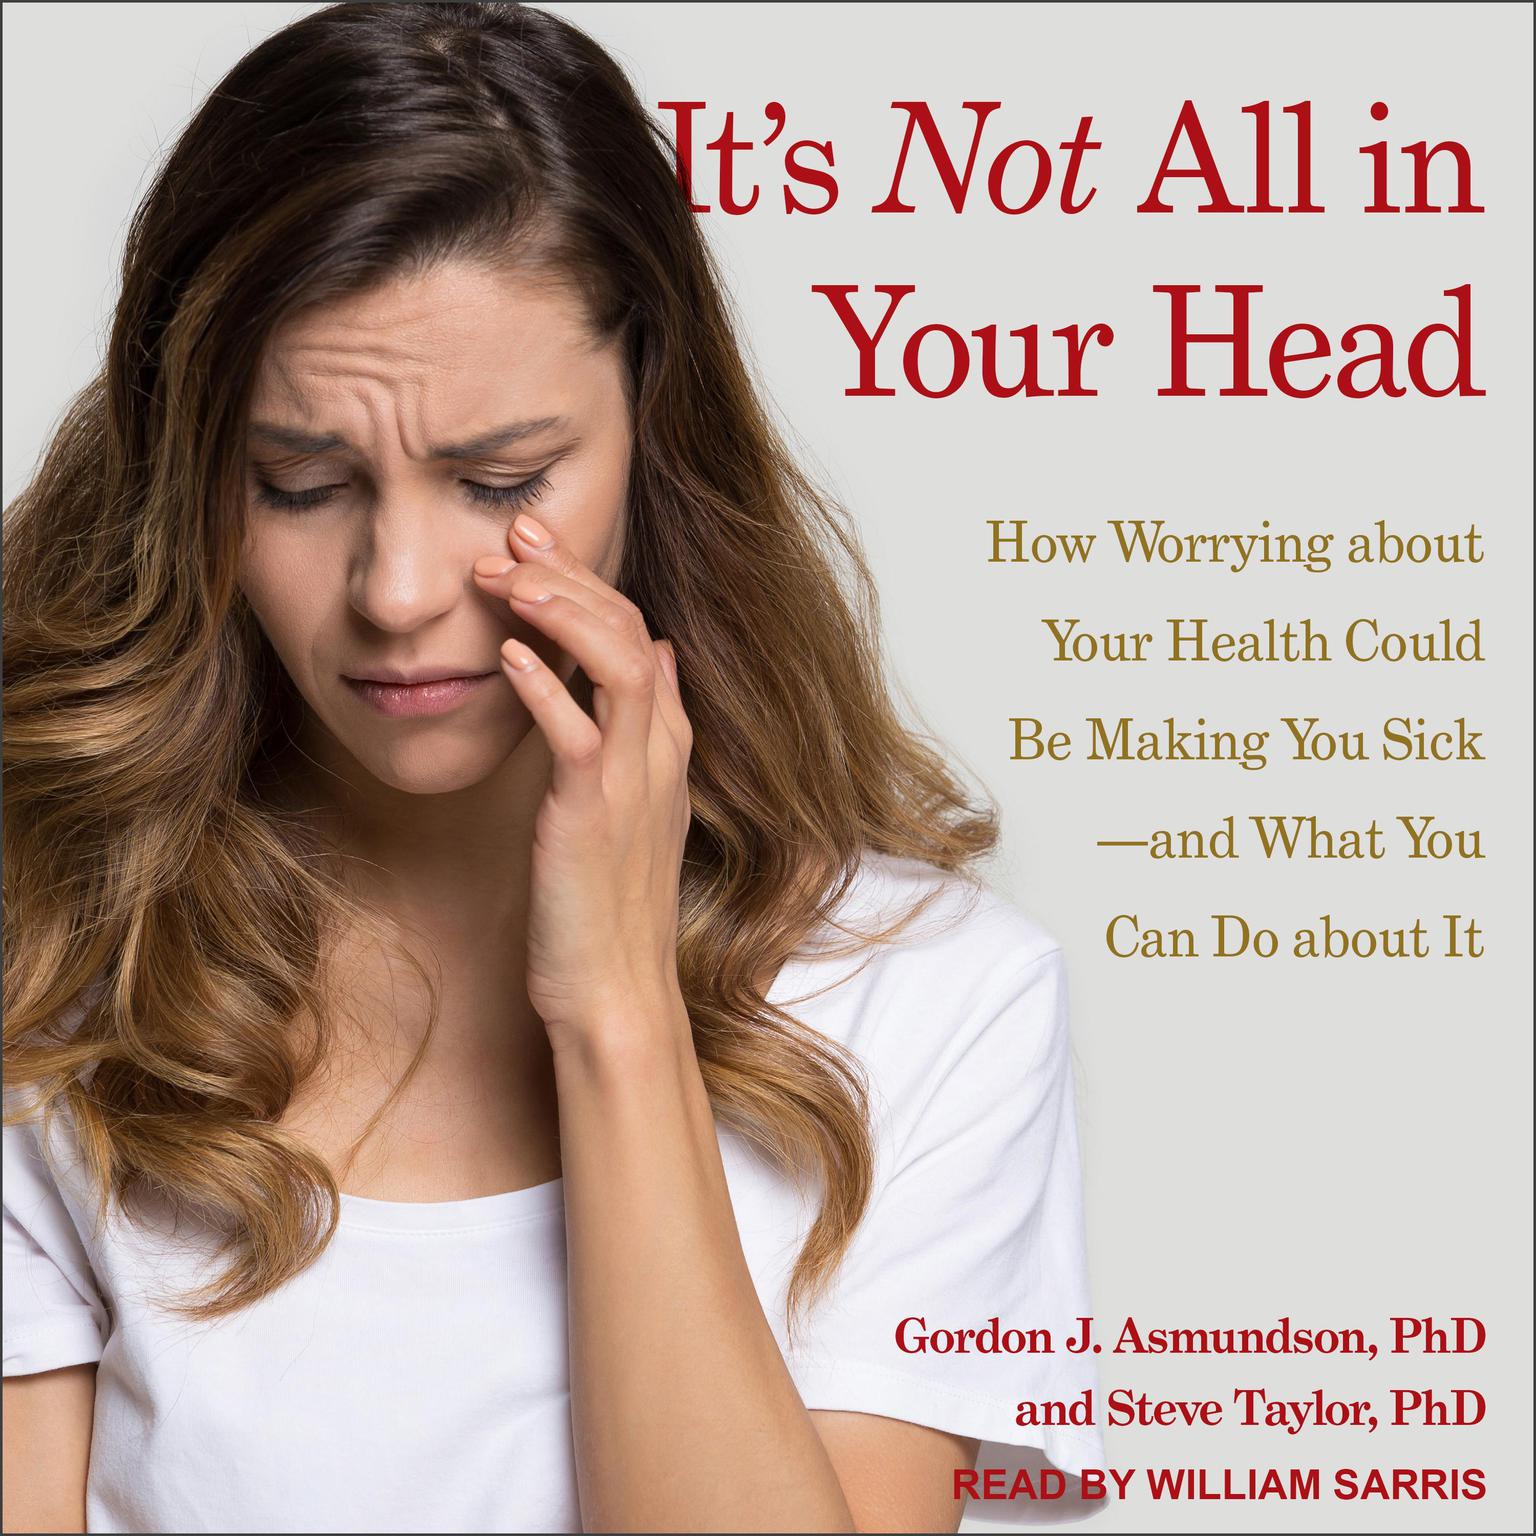 Its Not All in Your Head: How Worrying about Your Health Could Be Making You Sick-and What You Can Do about It Audiobook, by Gordon J. Asmundson